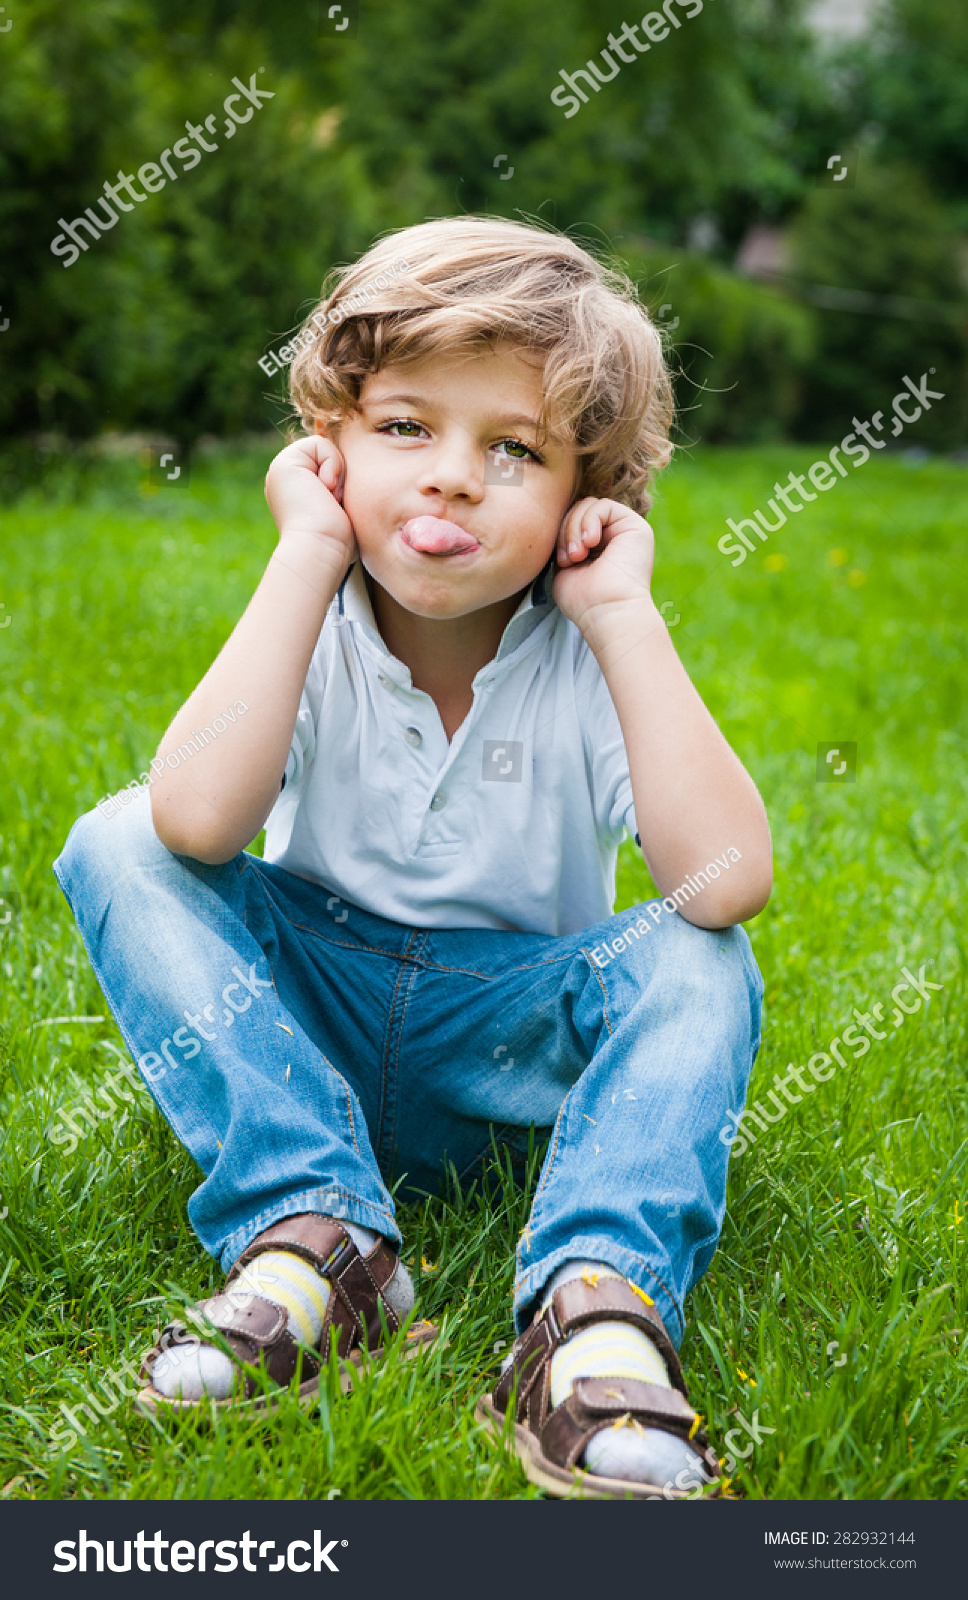 Little Boy Sticking Out His Tongue Foto Stok 282932144 Shutterstock 1177